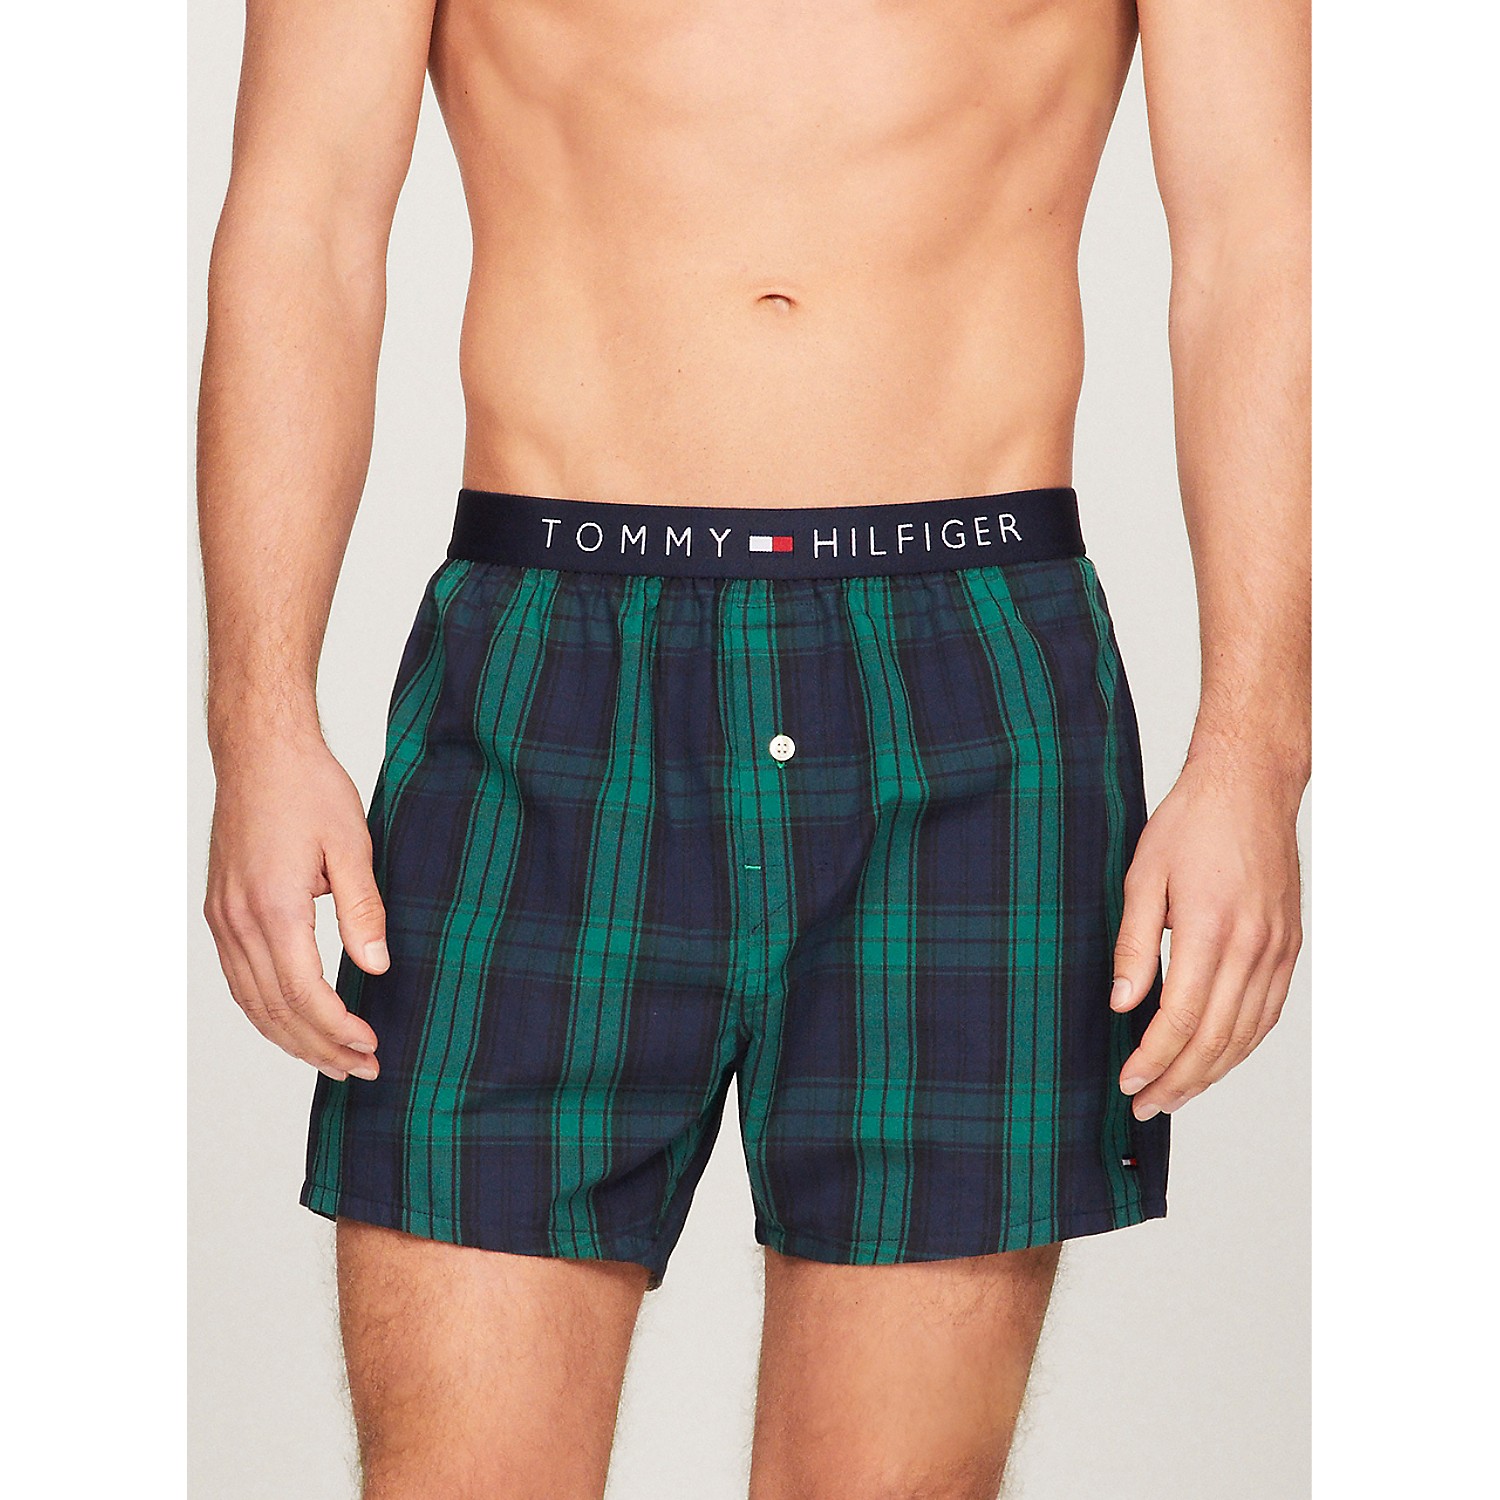 TOMMY HILFIGER Slim Fit Microflag Woven Boxer